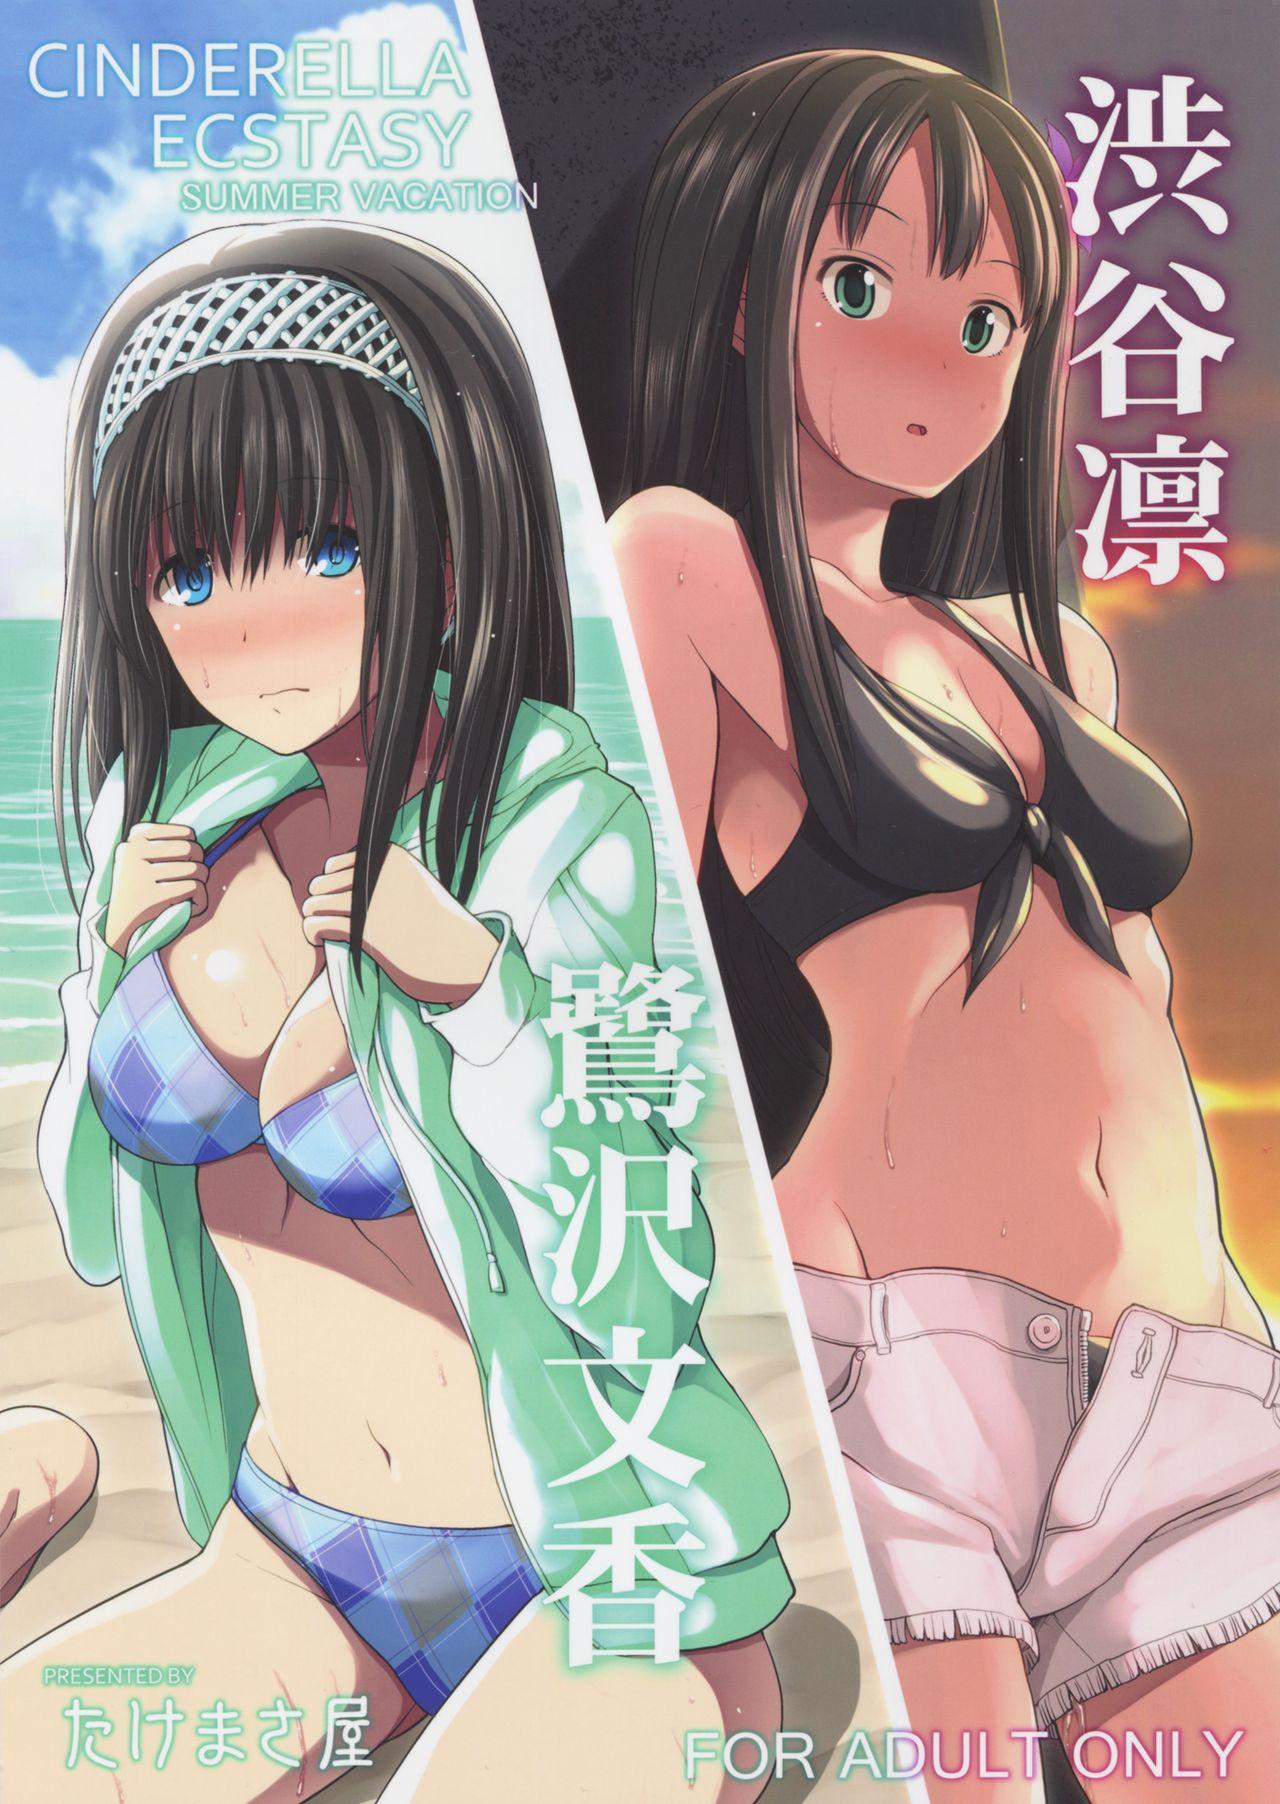 Sapphic CINDERELLA ECSTASY Summer Vacation - The idolmaster Story - Page 1